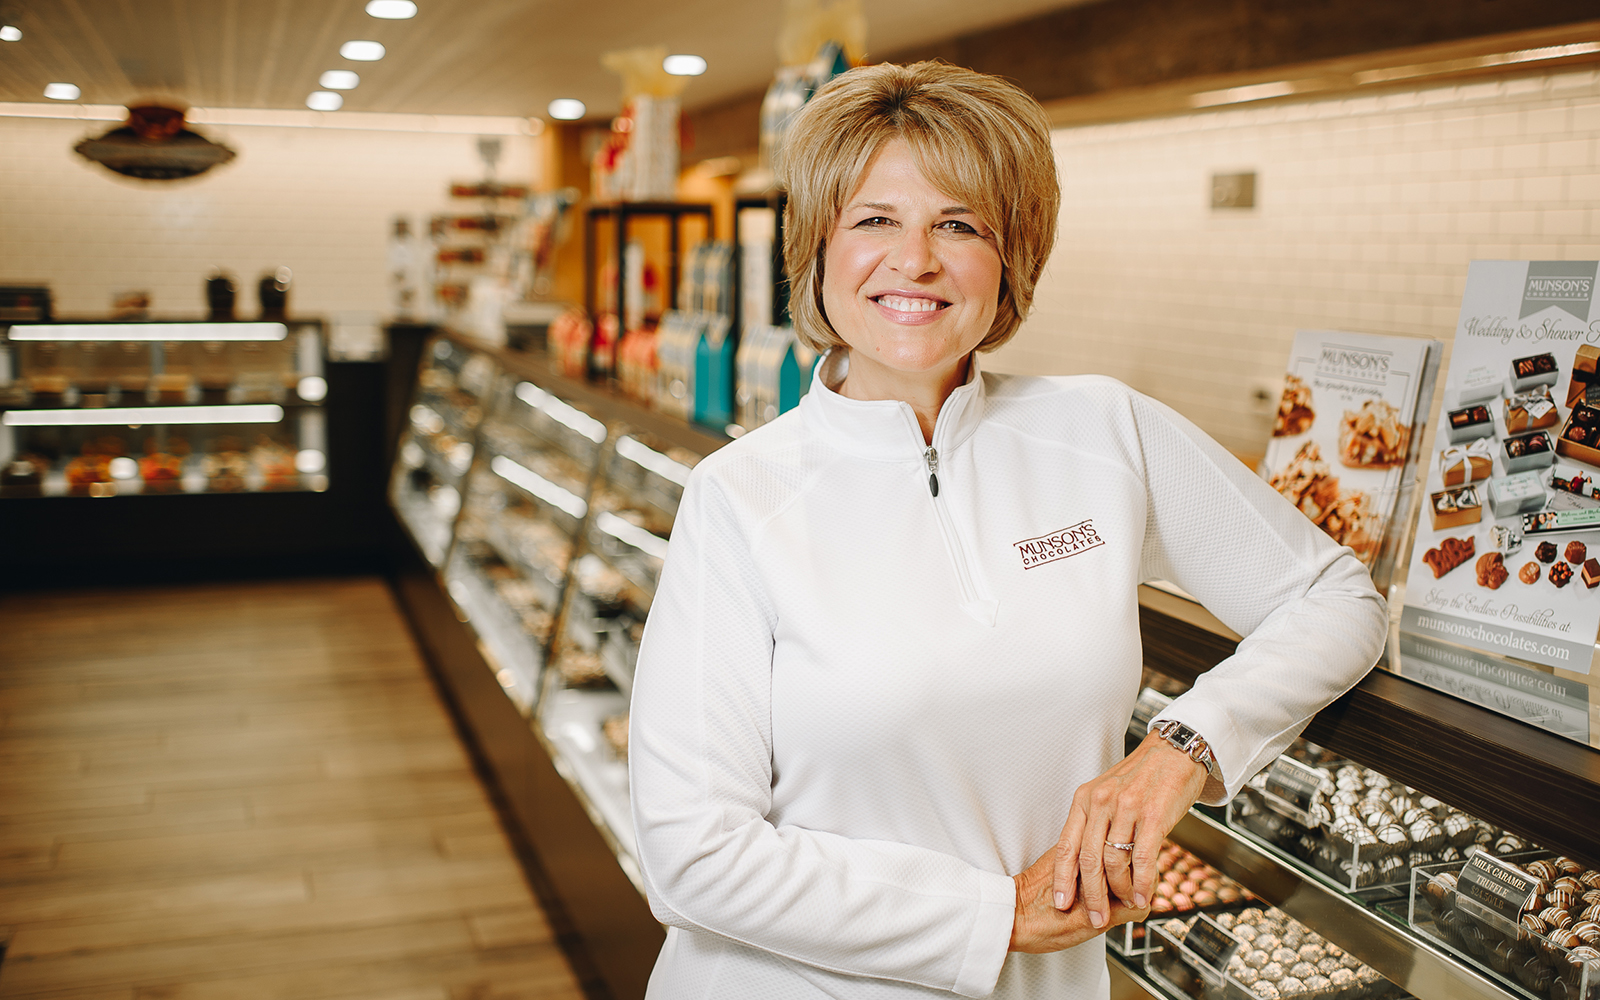 Karen Munson, the president of Munson's Chocolates, in her retail store in Bolton, CT.  At this location, Munson's produces 350,000 pounds of chocolate per year.  (Nathan Oldham / UConn School of Business)